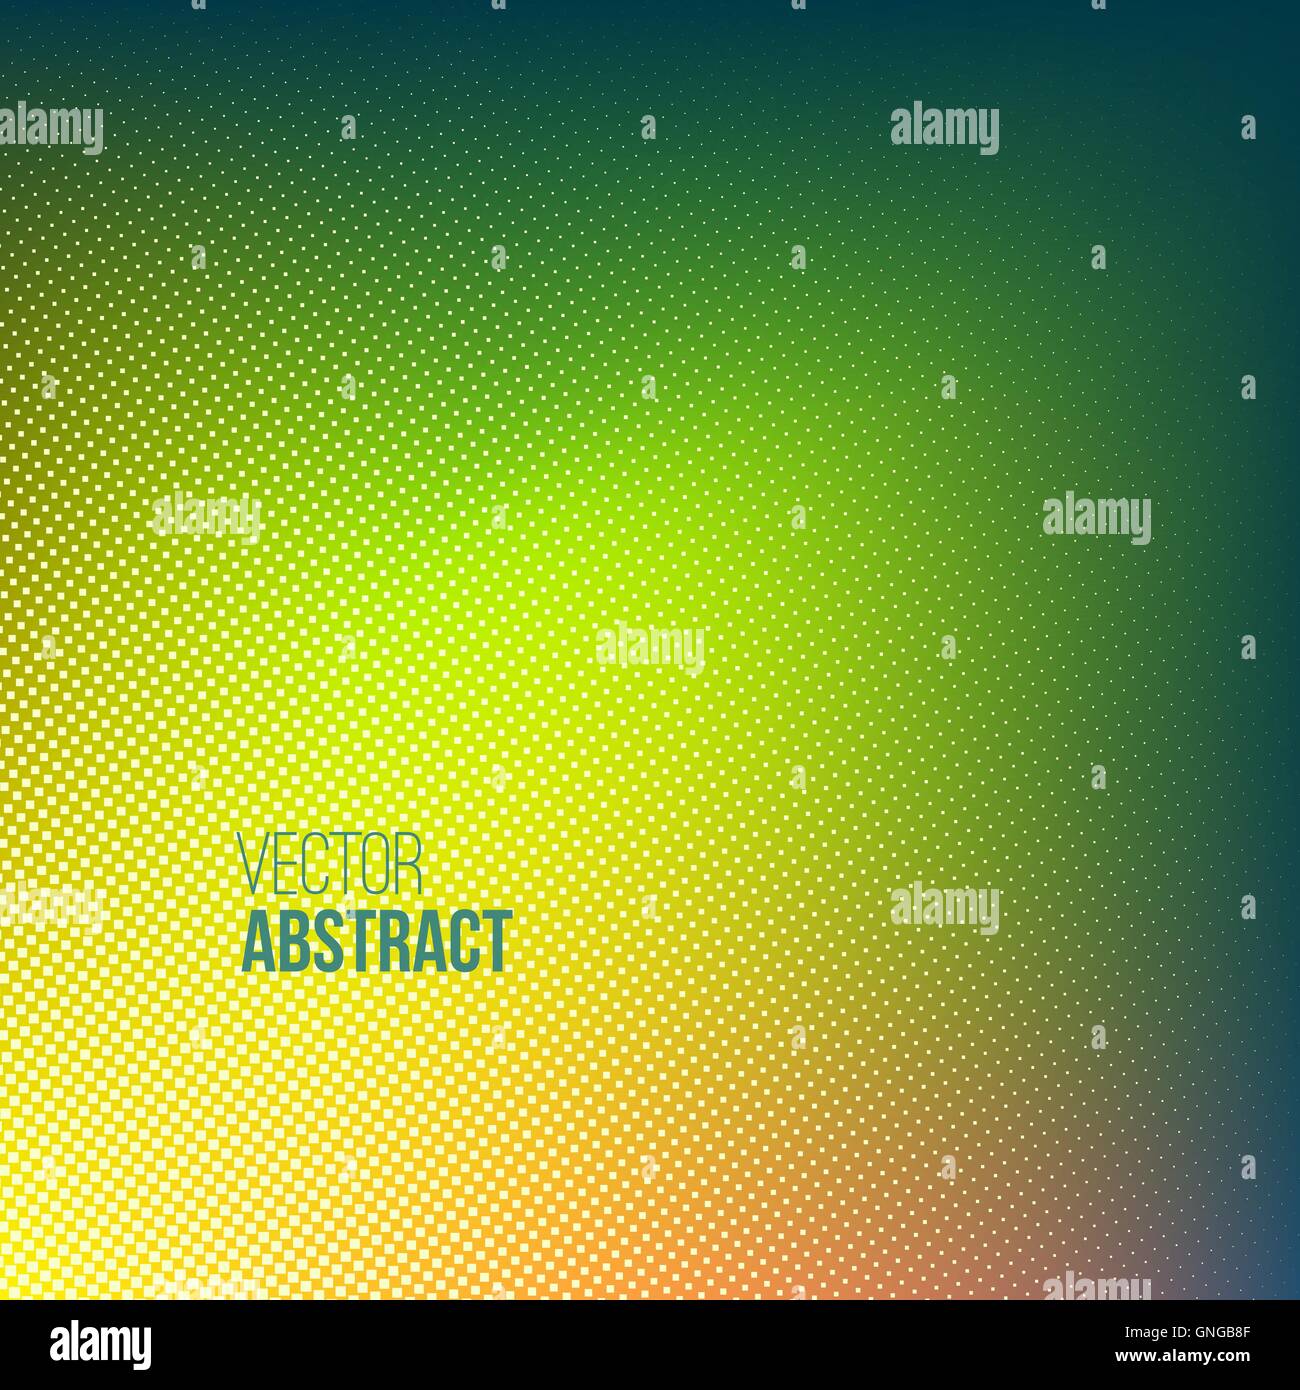 Halftone background. Green abstract spotted pattern. Stock Vector